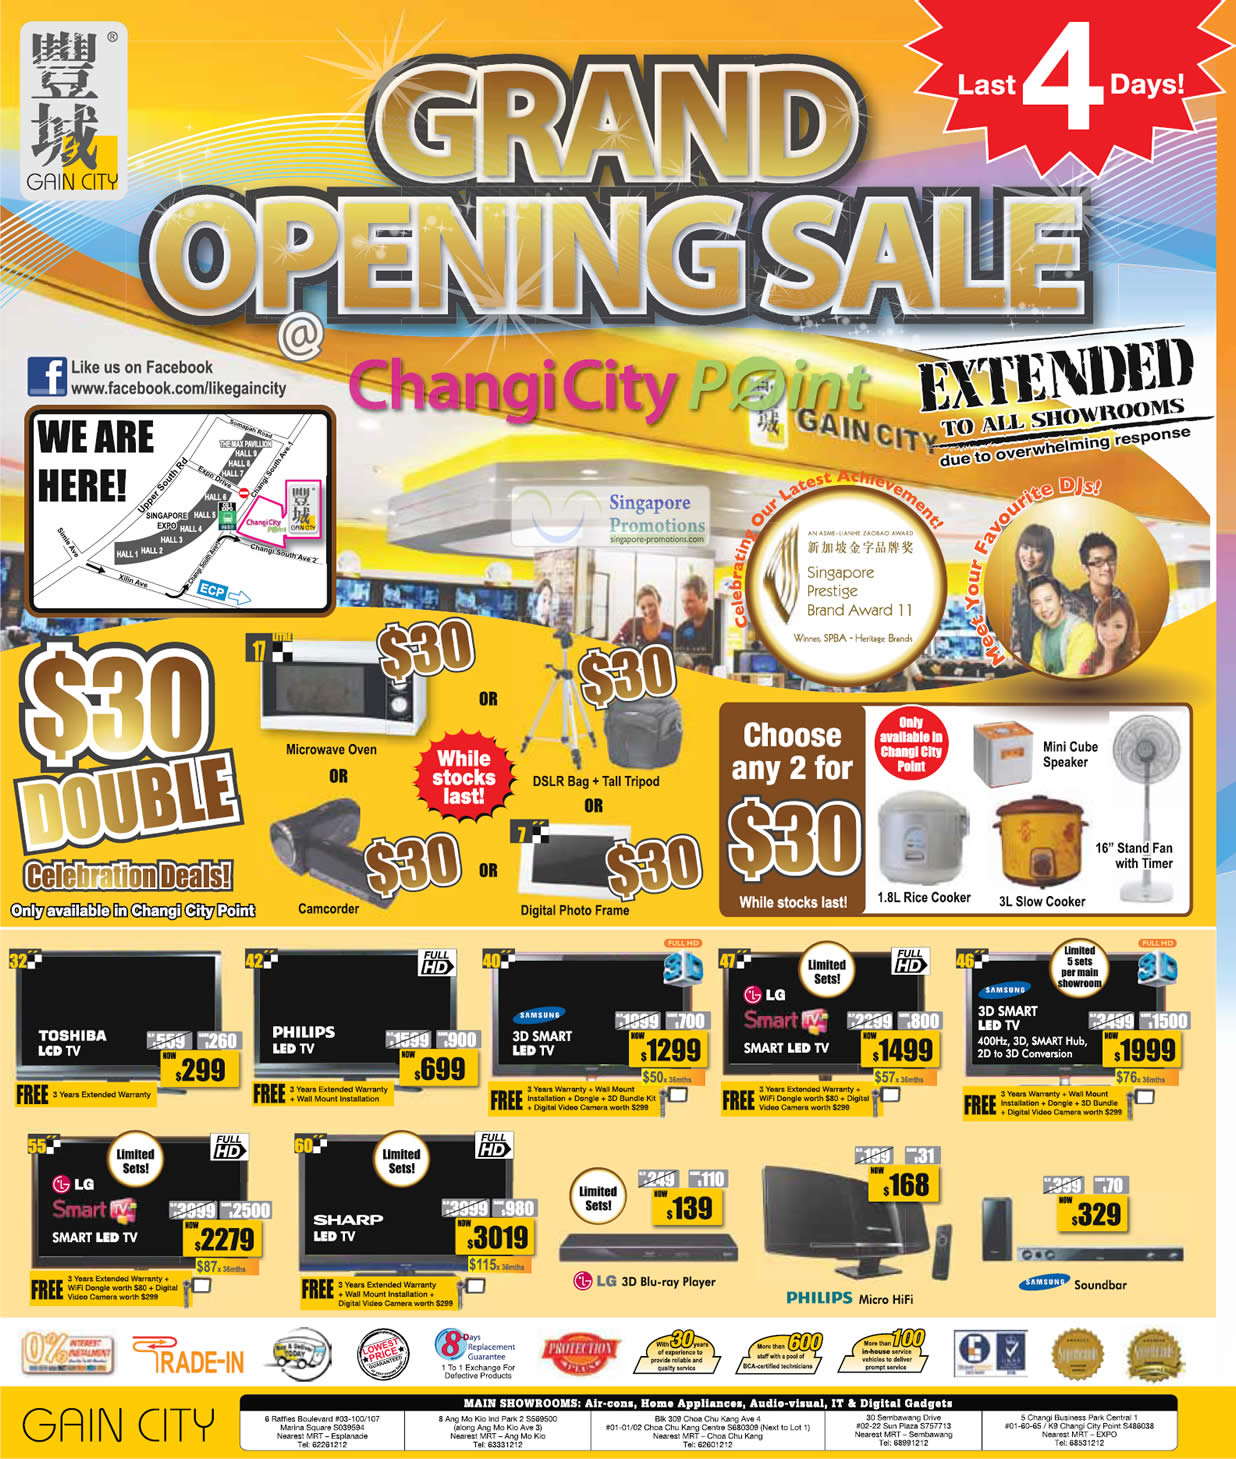 Featured image for Gain City Changi City Point Opening Special Offers Promotion 16 Dec 2011